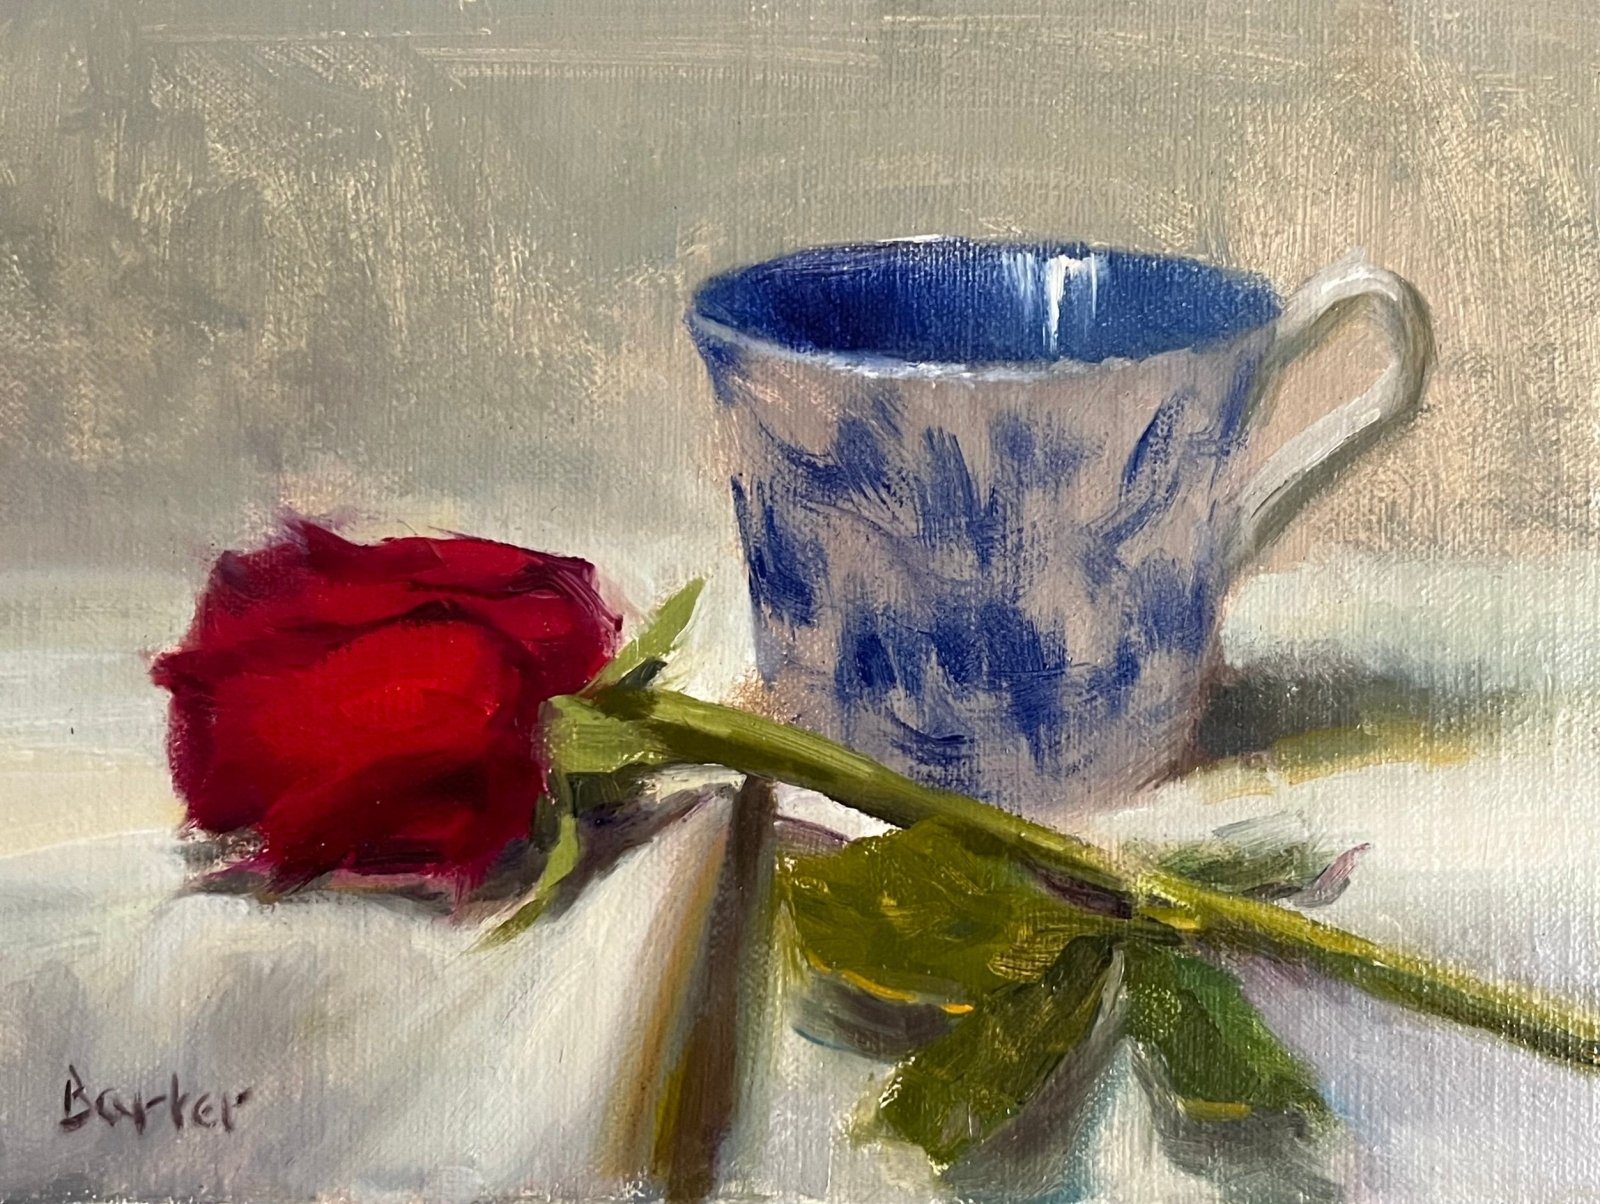 Rose and Tea Cup by Stacy Barter at LePrince Galleries